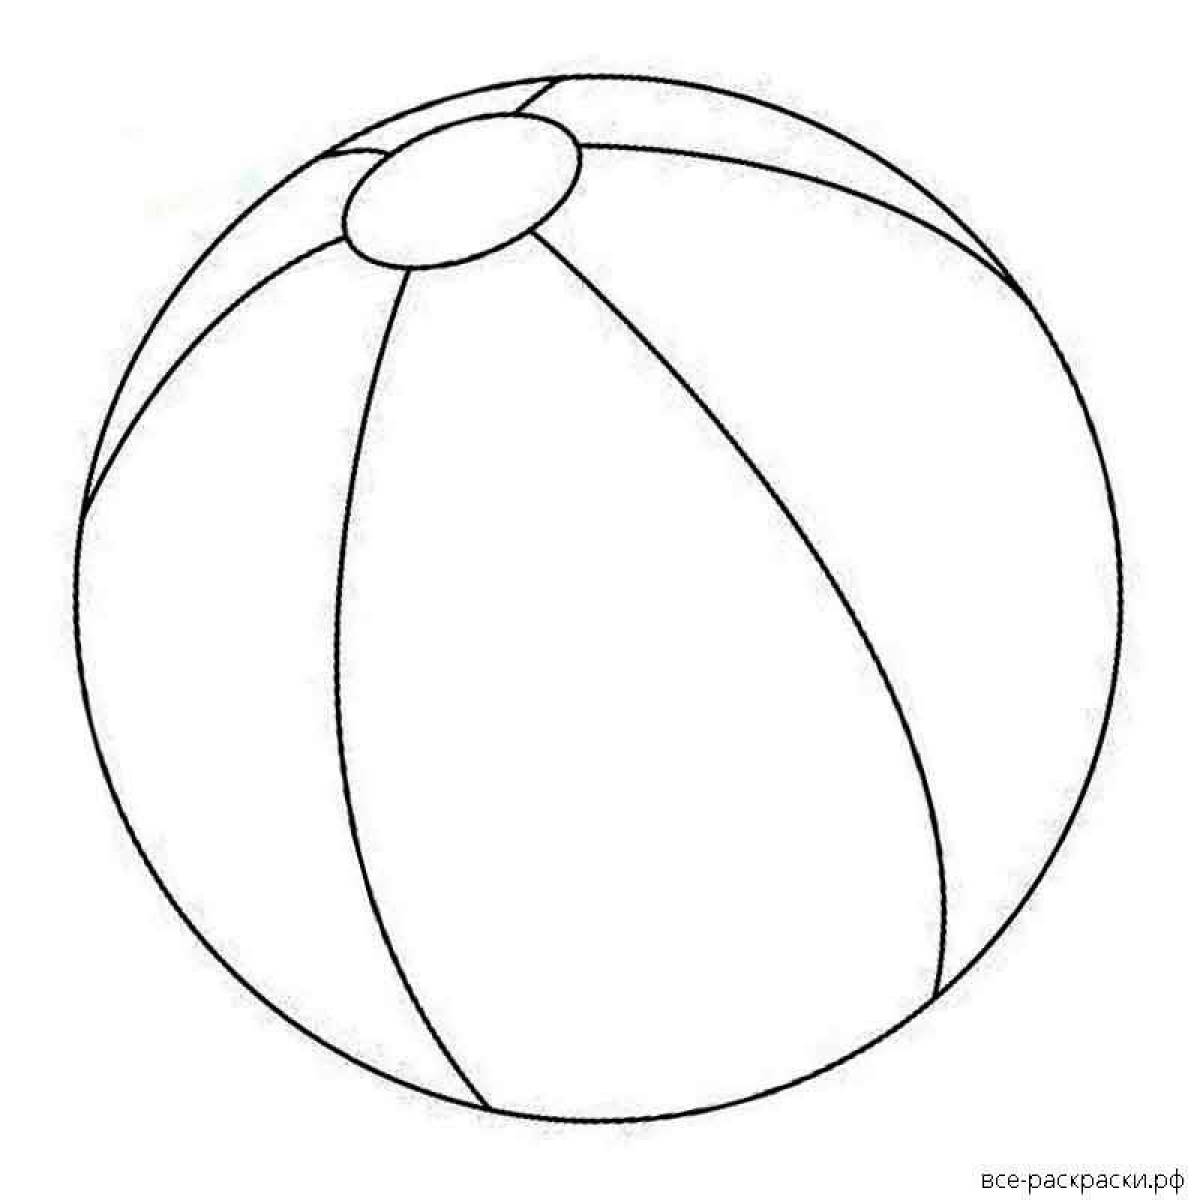 Playful ball coloring page for kids